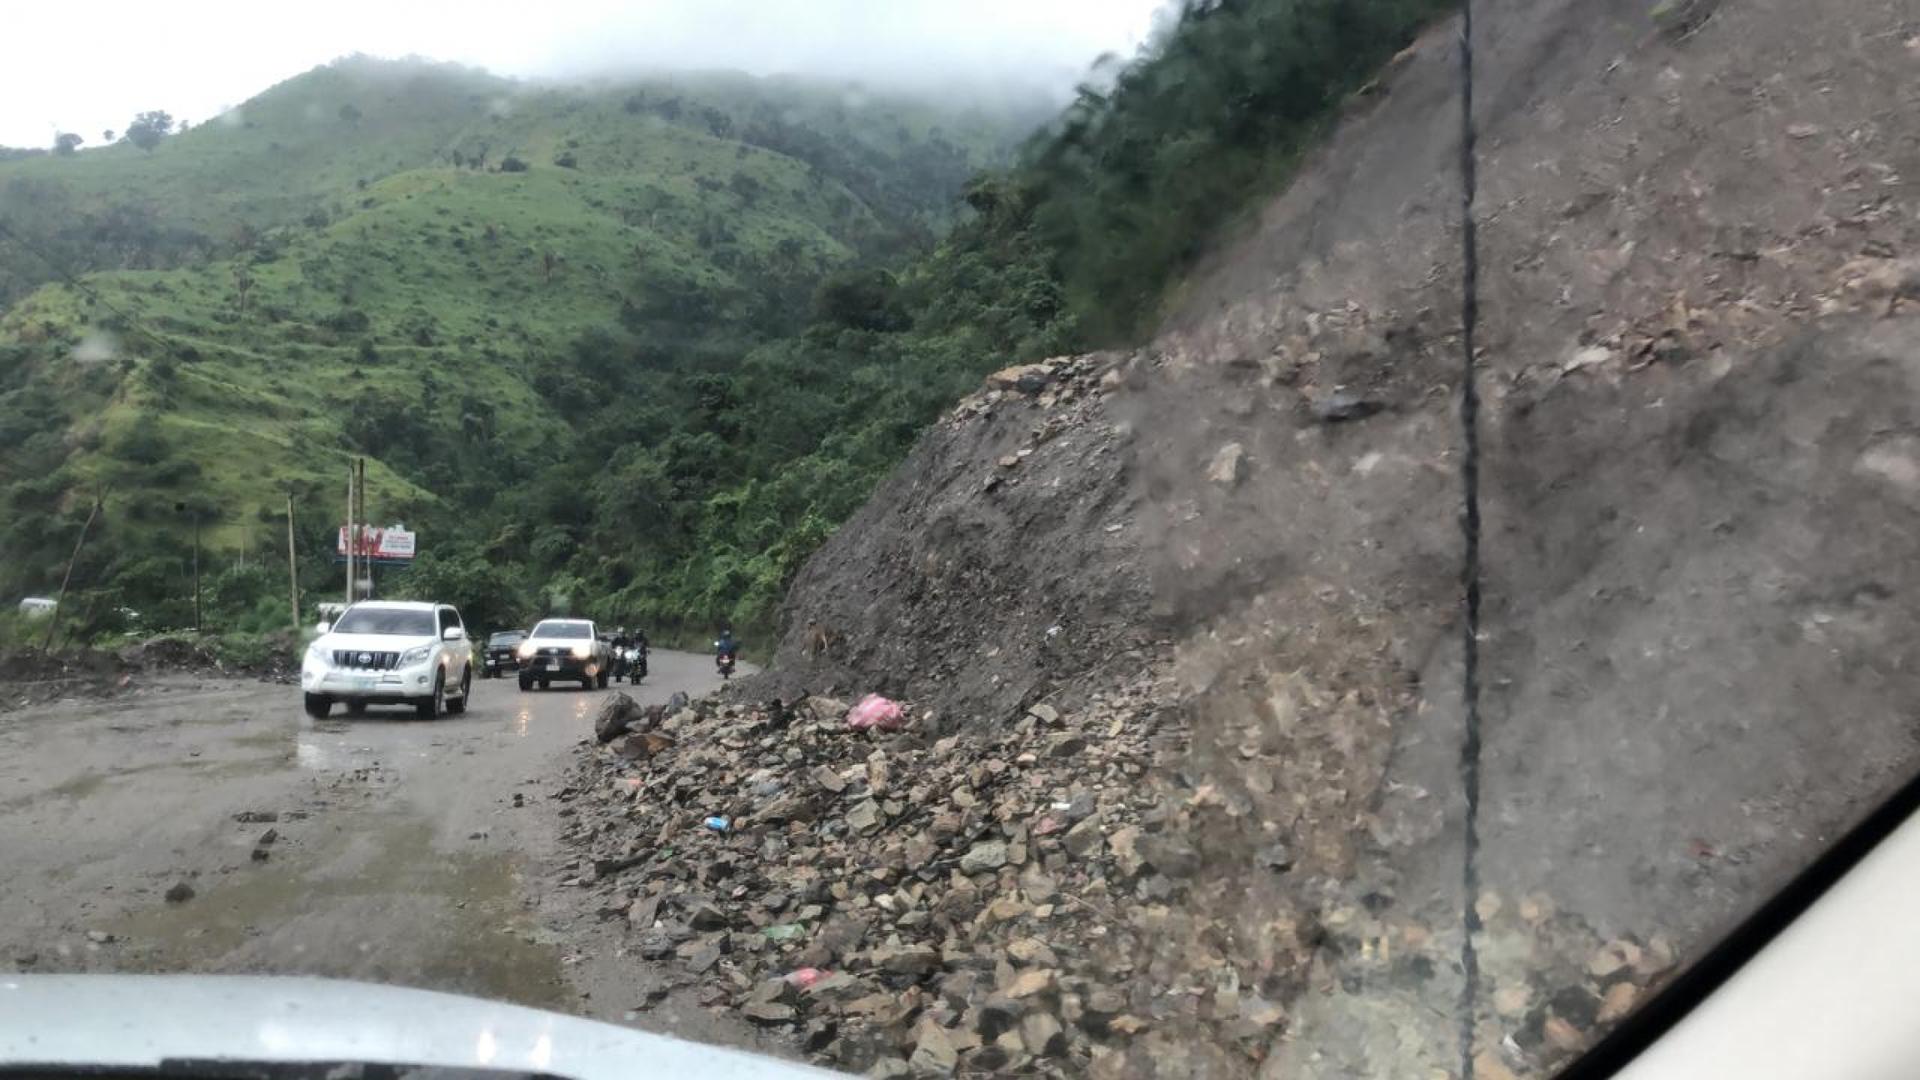 Attorney Dora Melara drives long distances for even the slimmest chance of finding parents, despite any challenges — and there have been many. Already on this trip, she is encountering one rockslide after another.